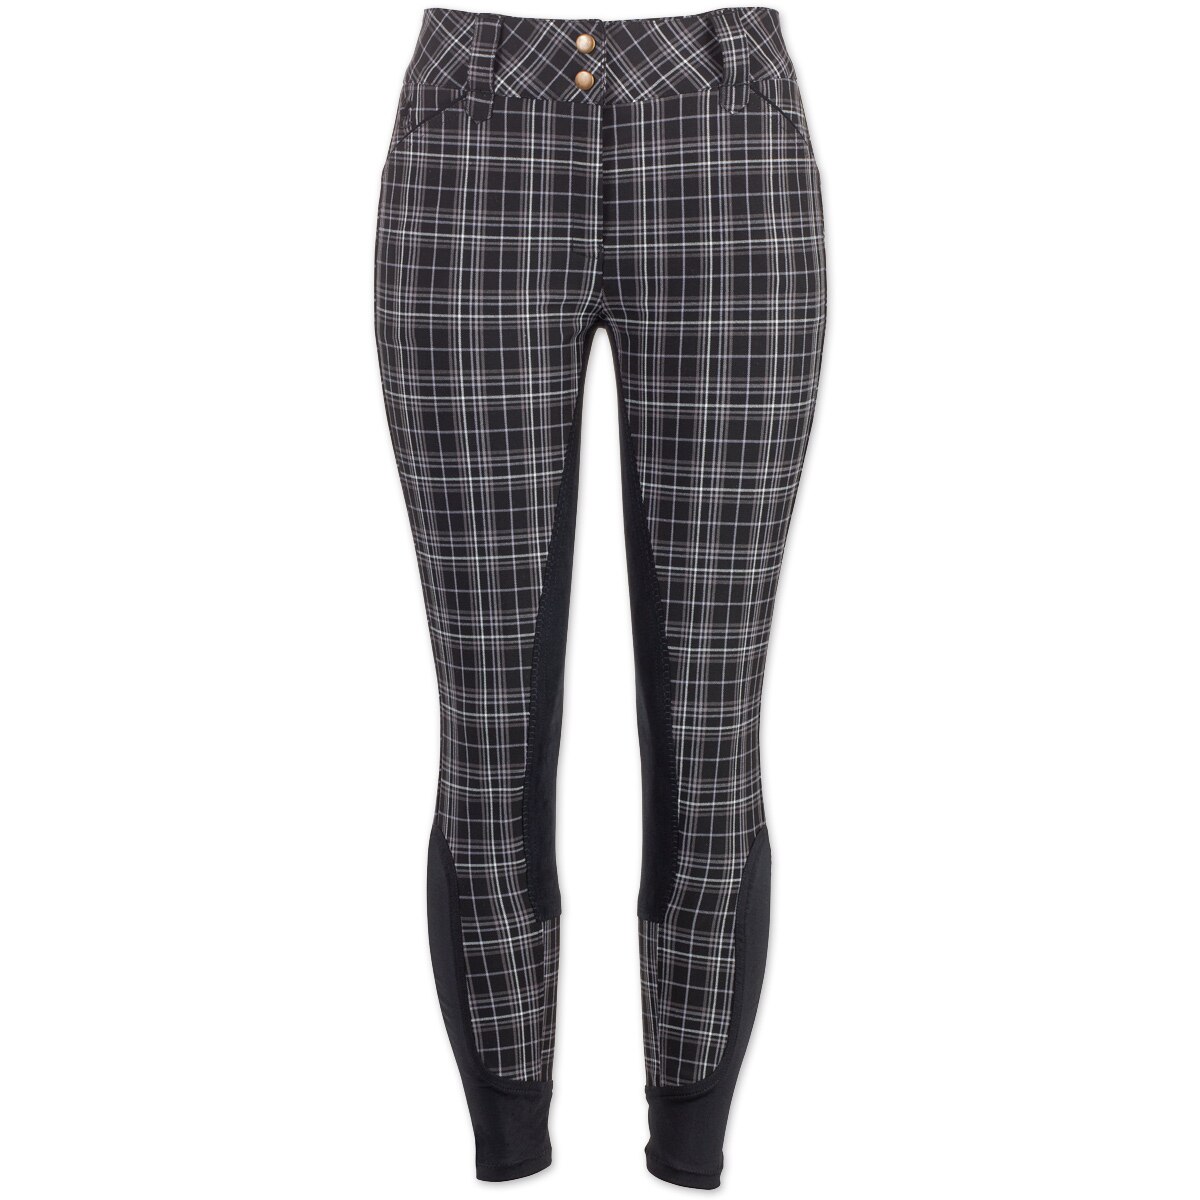 Piper Breeches by SmartPak - Plaid Full Seat